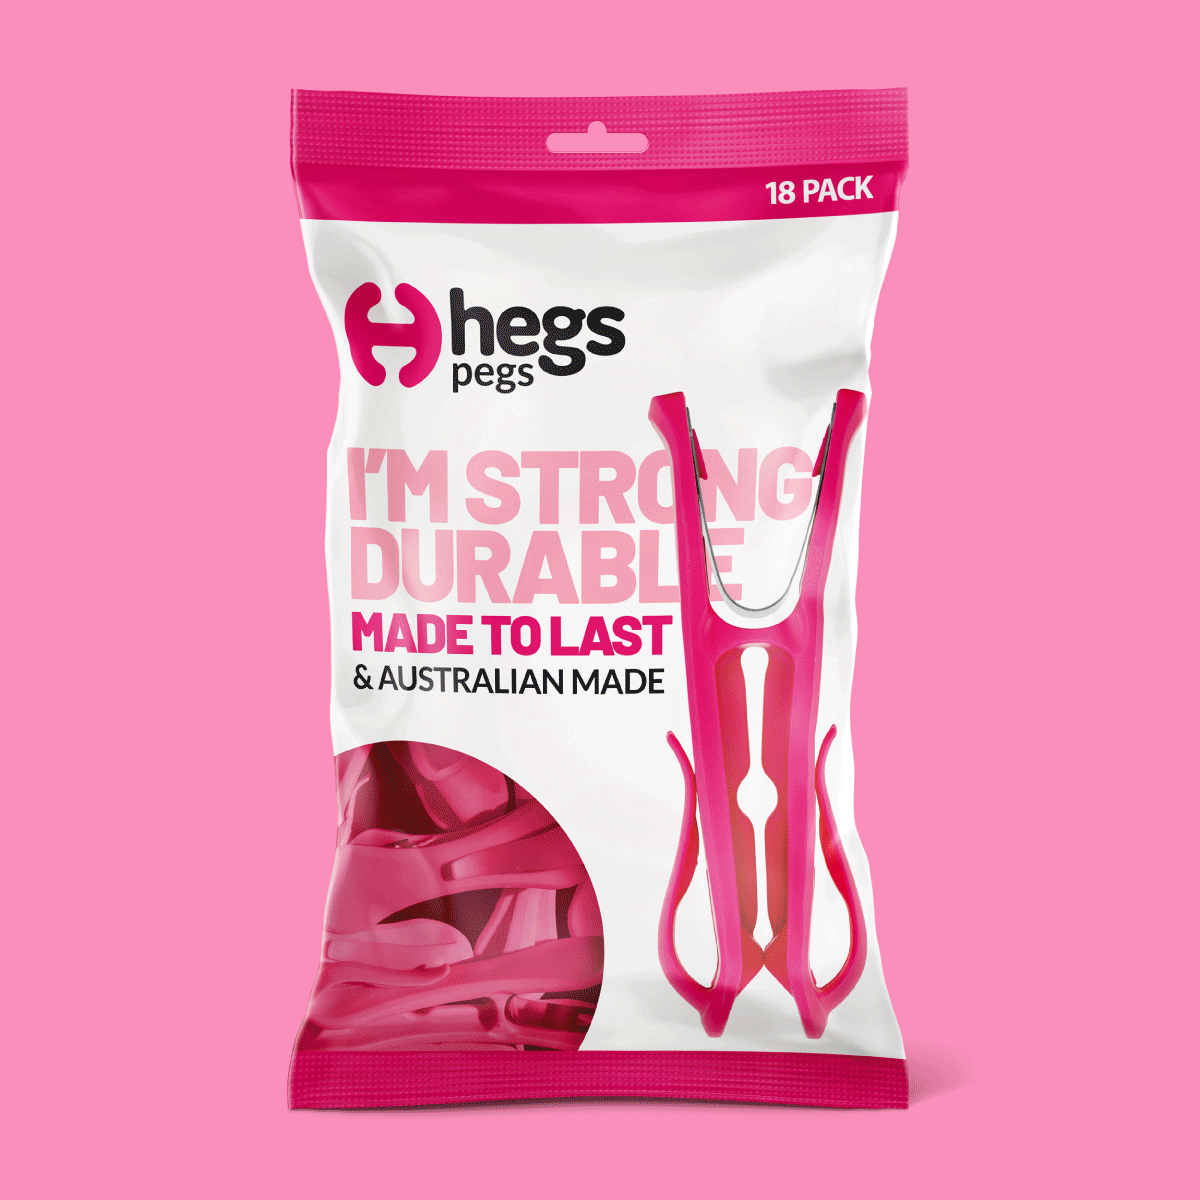 Hegs Pegs - Product colour range packaging design